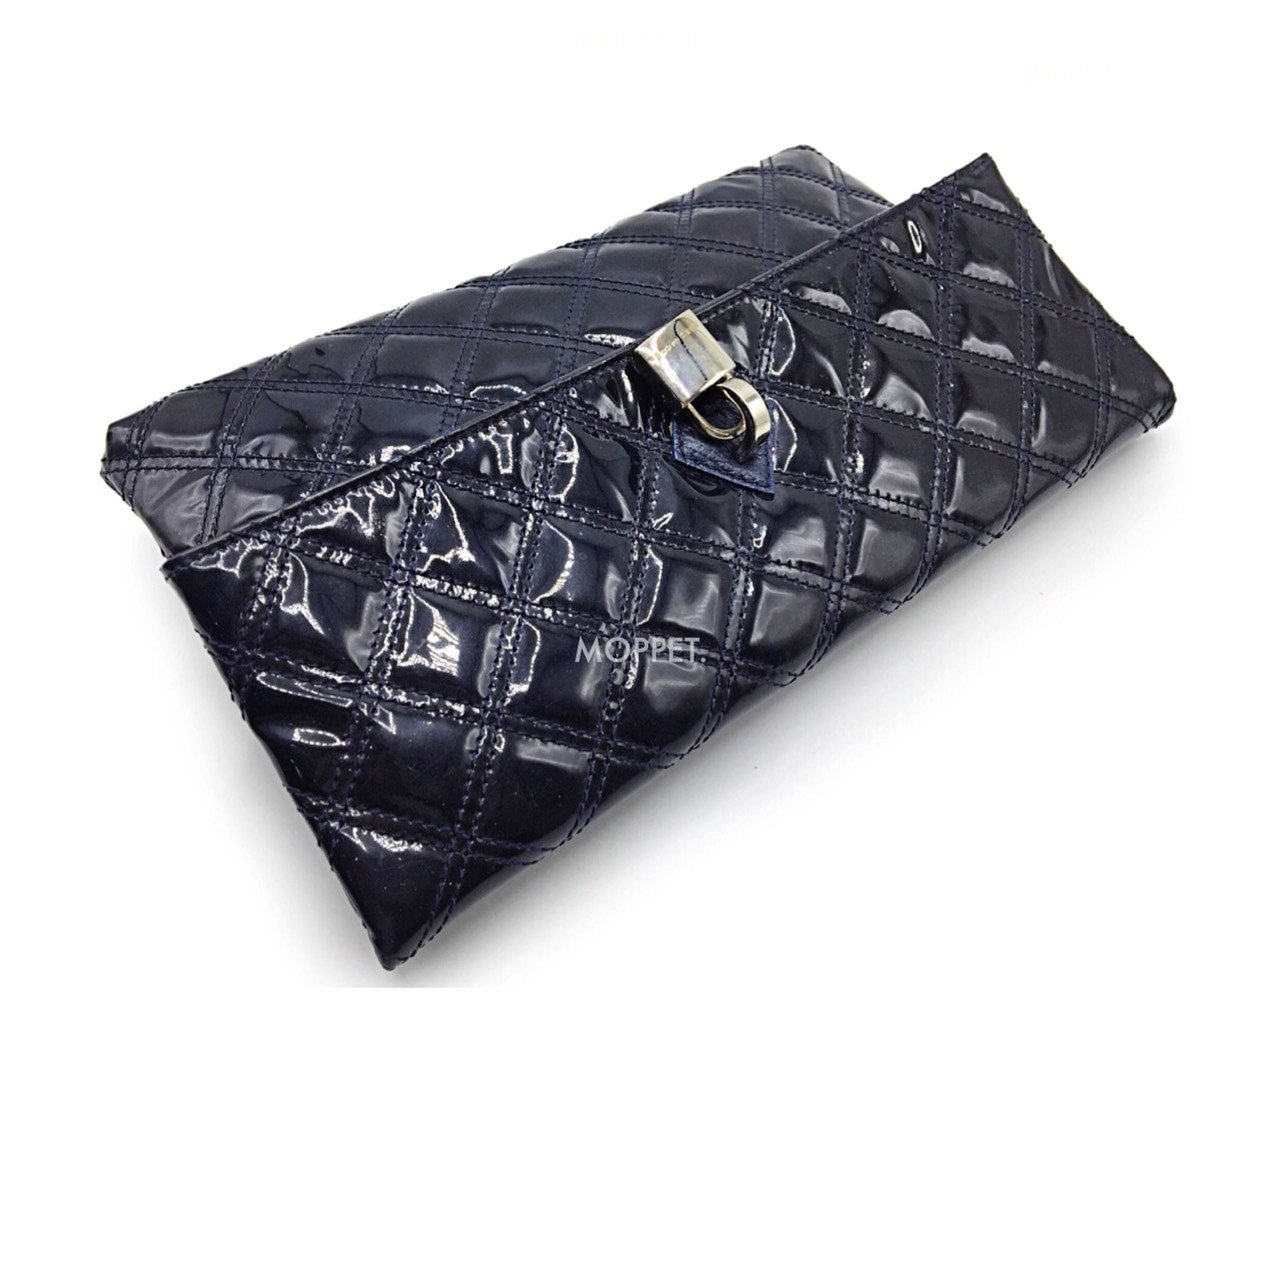 Used Marc By Marc Jacobs Clutch in Navy Patent SHW